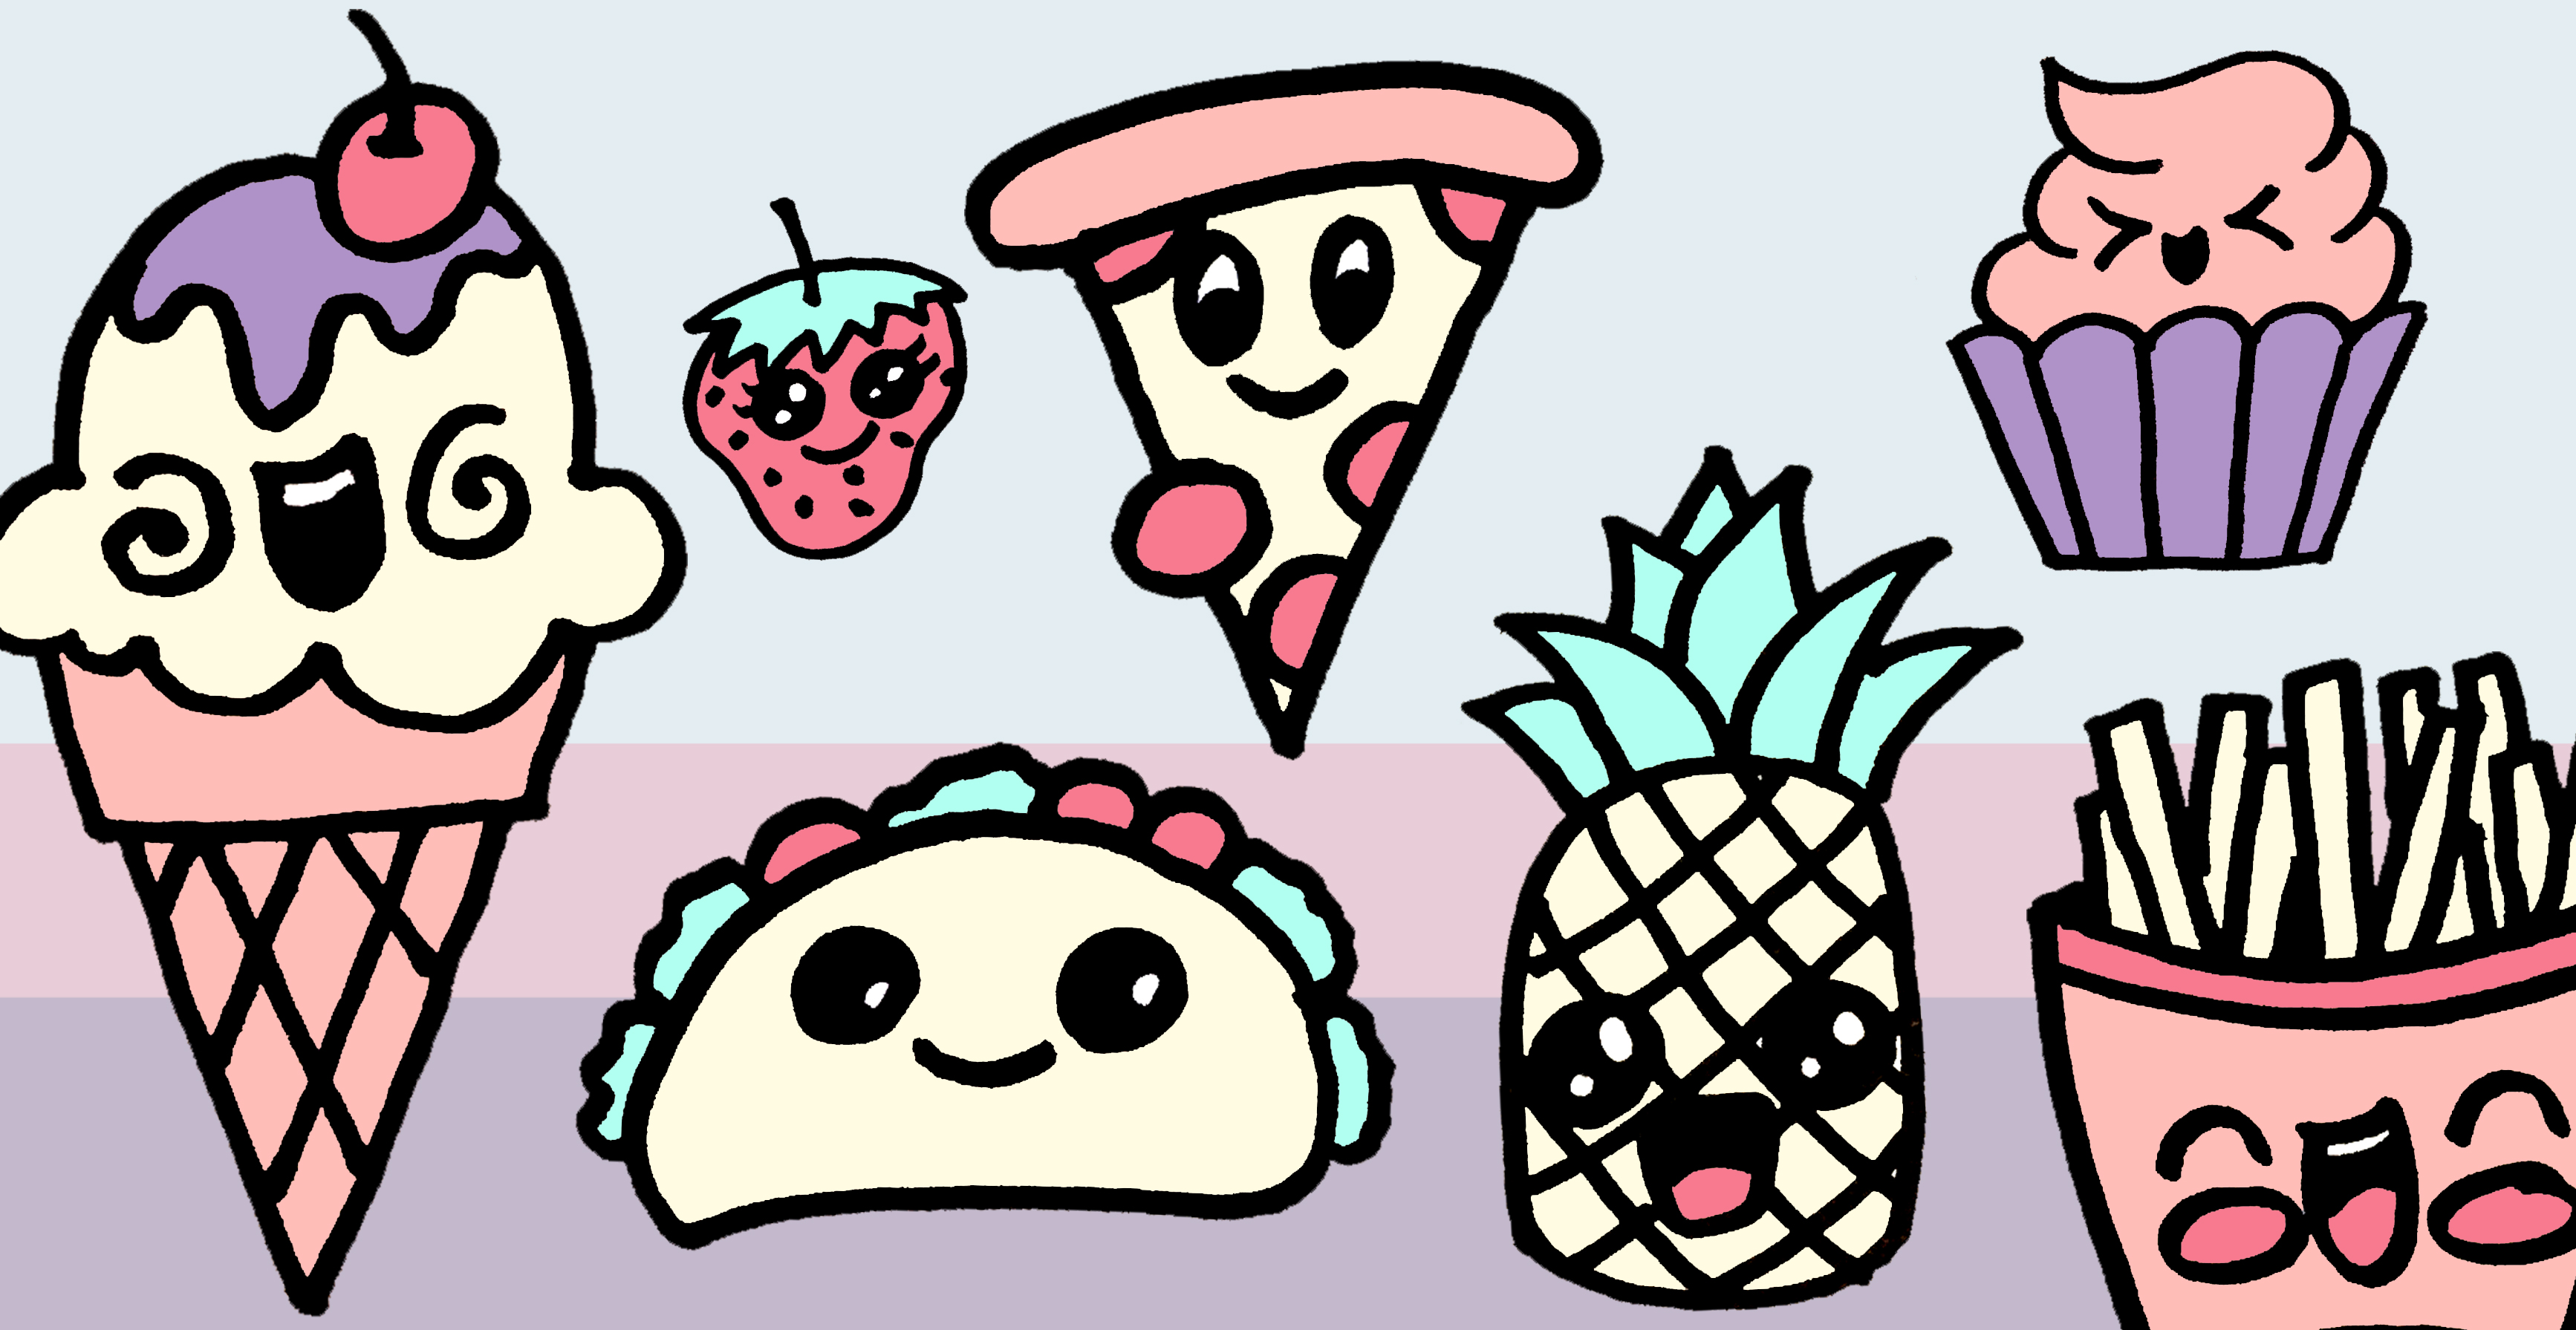 Draw & Color Cute Kawaii Food Characters | Small Online Class for Ages